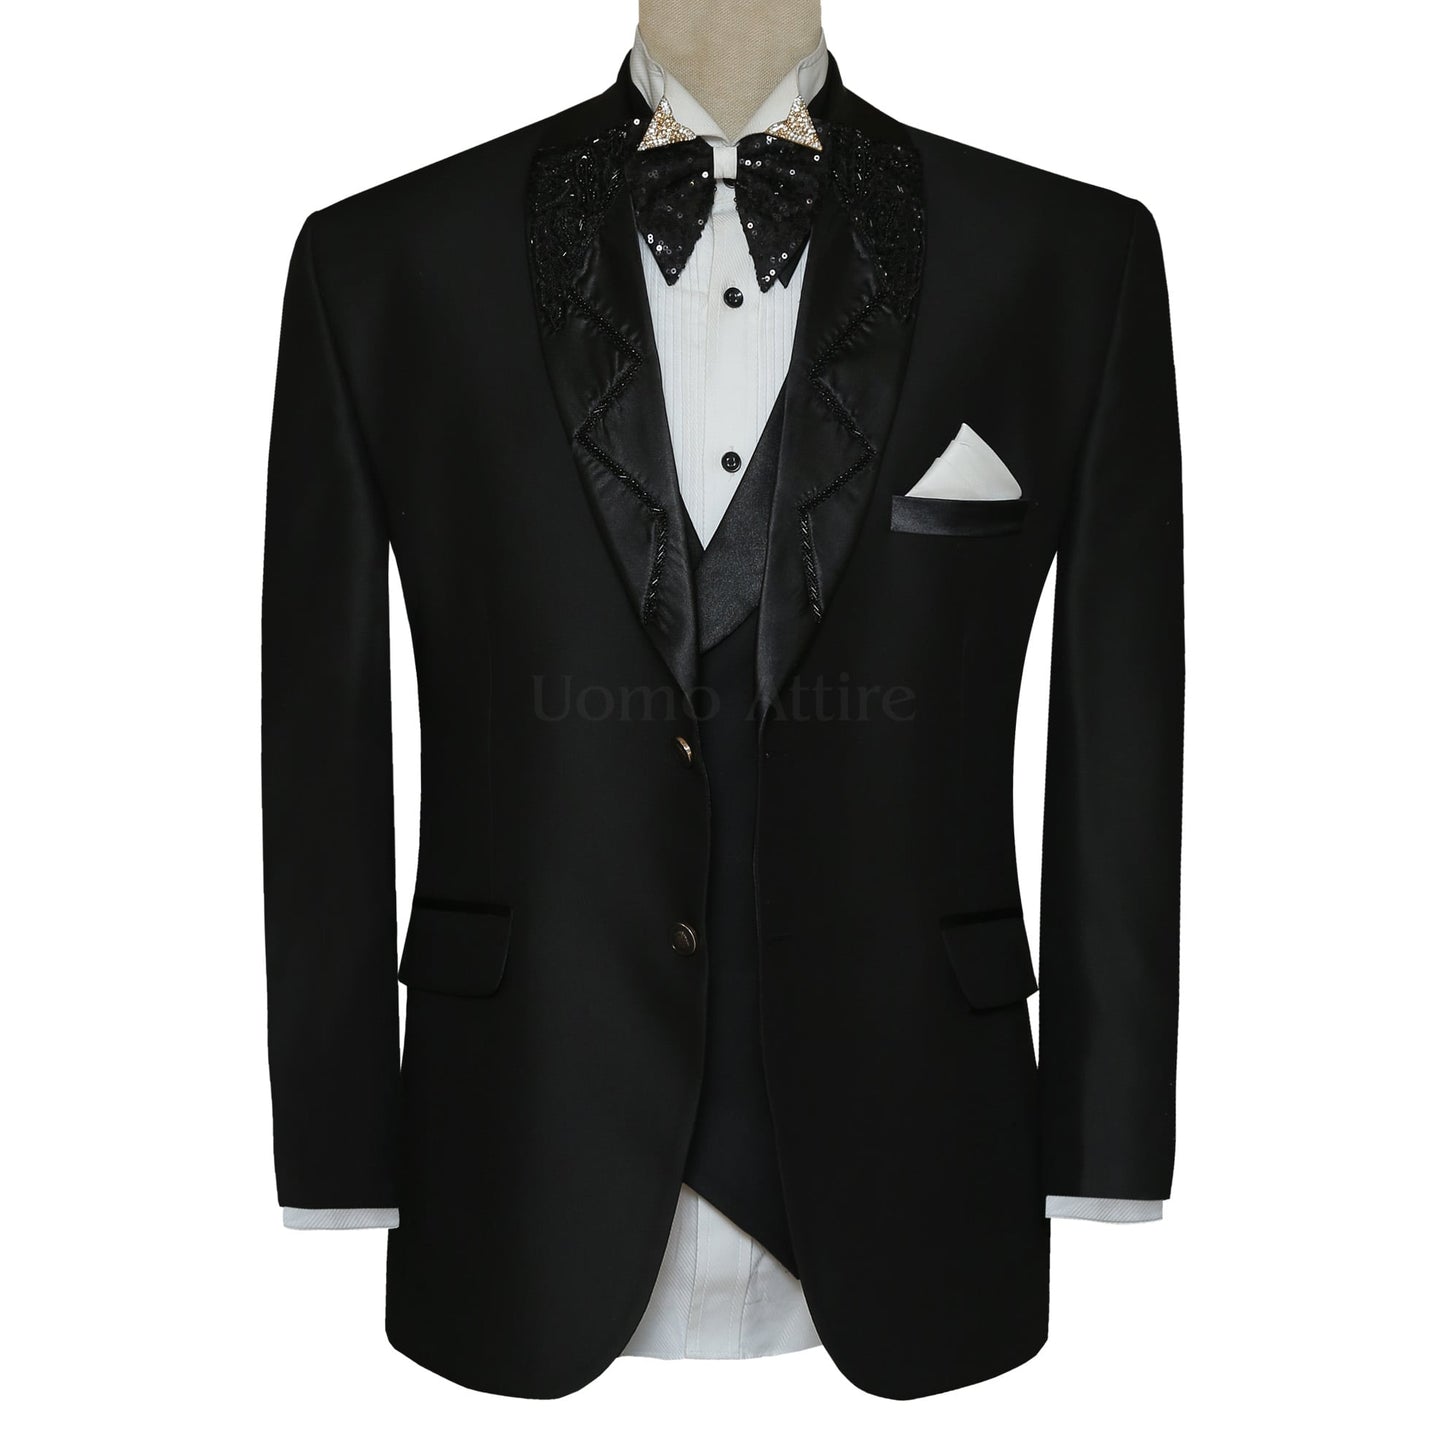 Black Tuxedo Wedding for Groom and Special Occasions